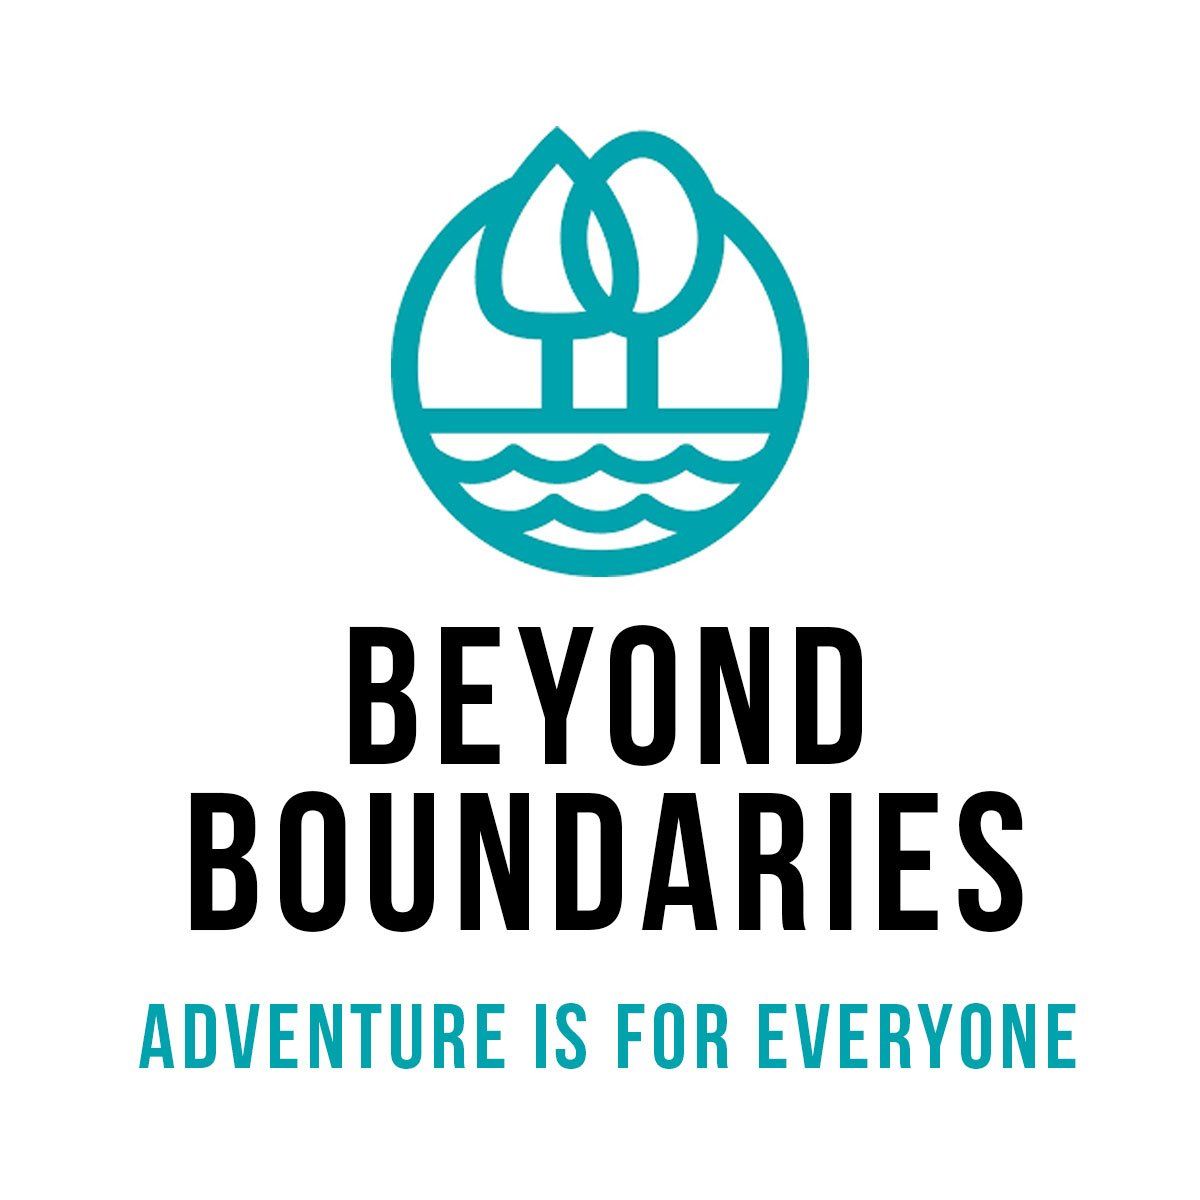 Beyond boundaries logo on we are river city community page